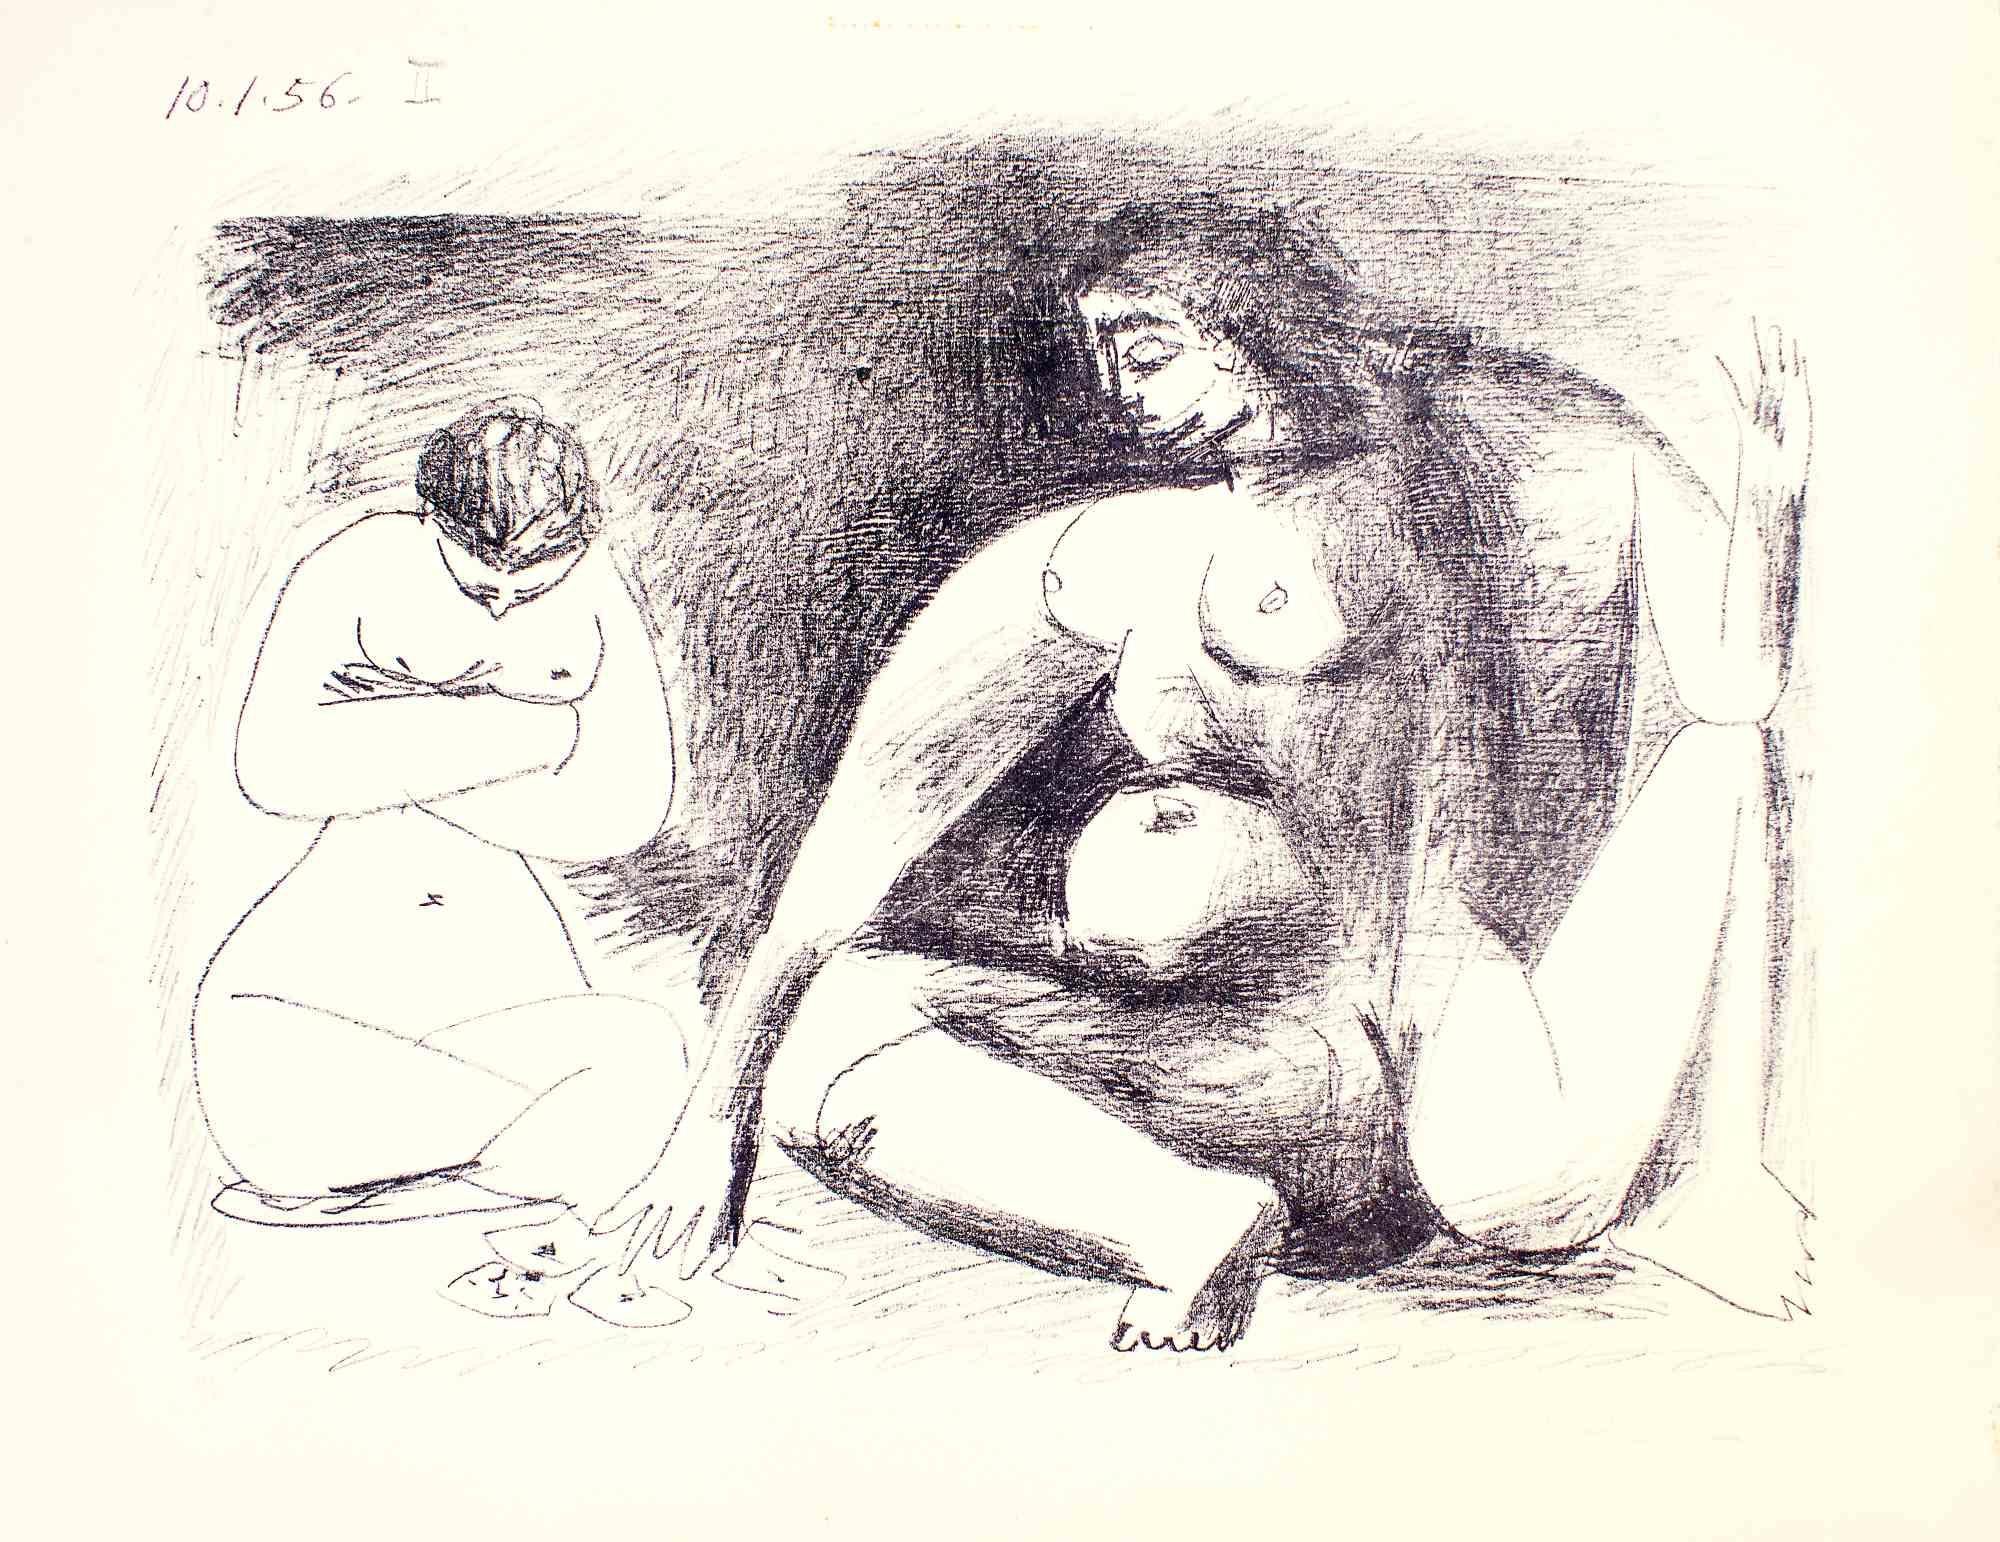 Deux Femmes Accroupies - Etching by Pablo Picasso - 1956